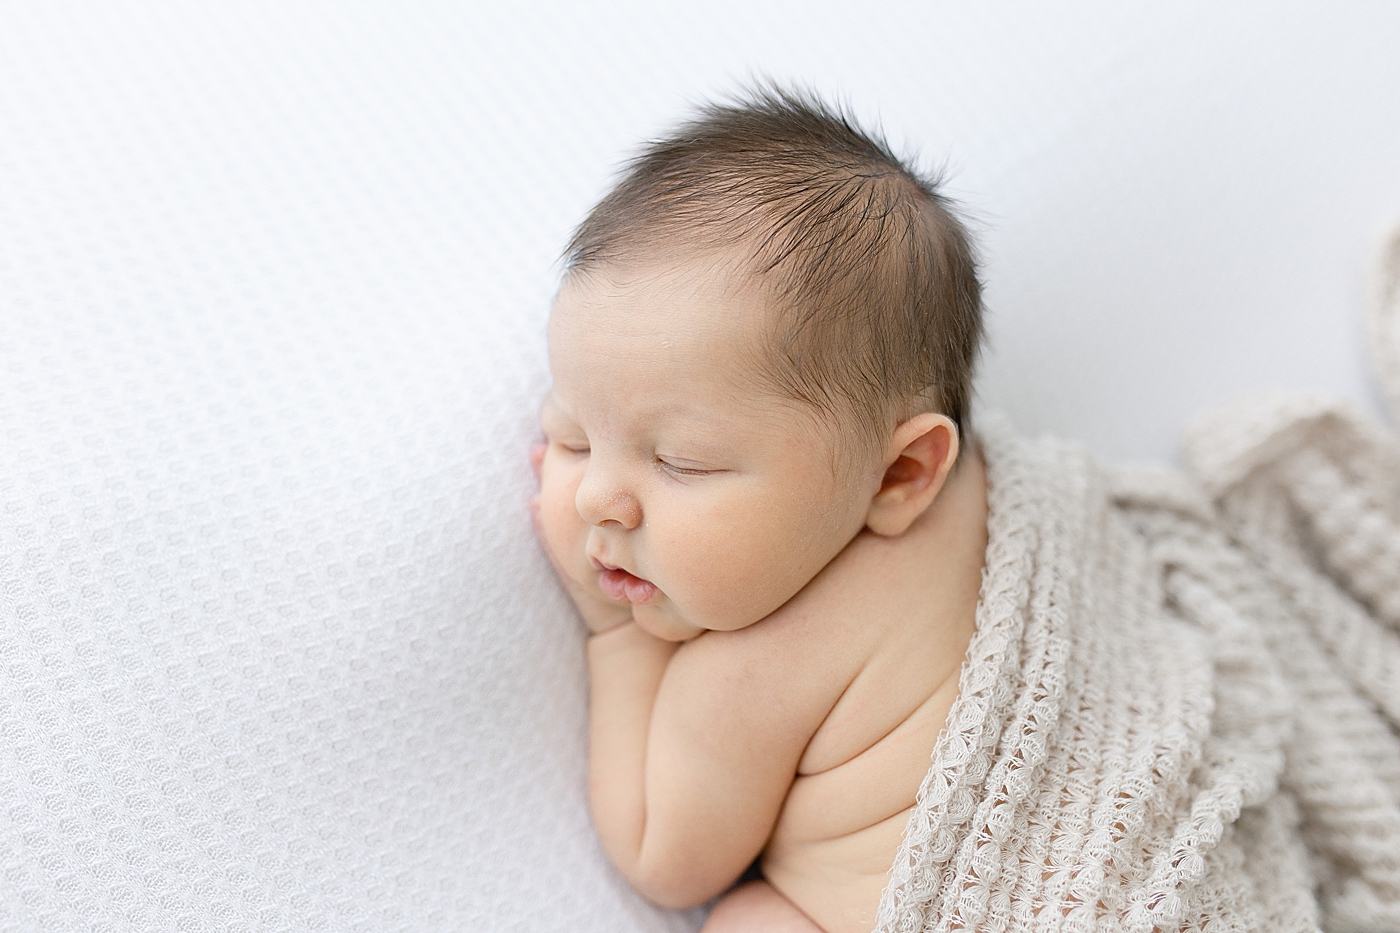 Newborn baby during in studio photo session. Photo by Little Sunshine Photography.